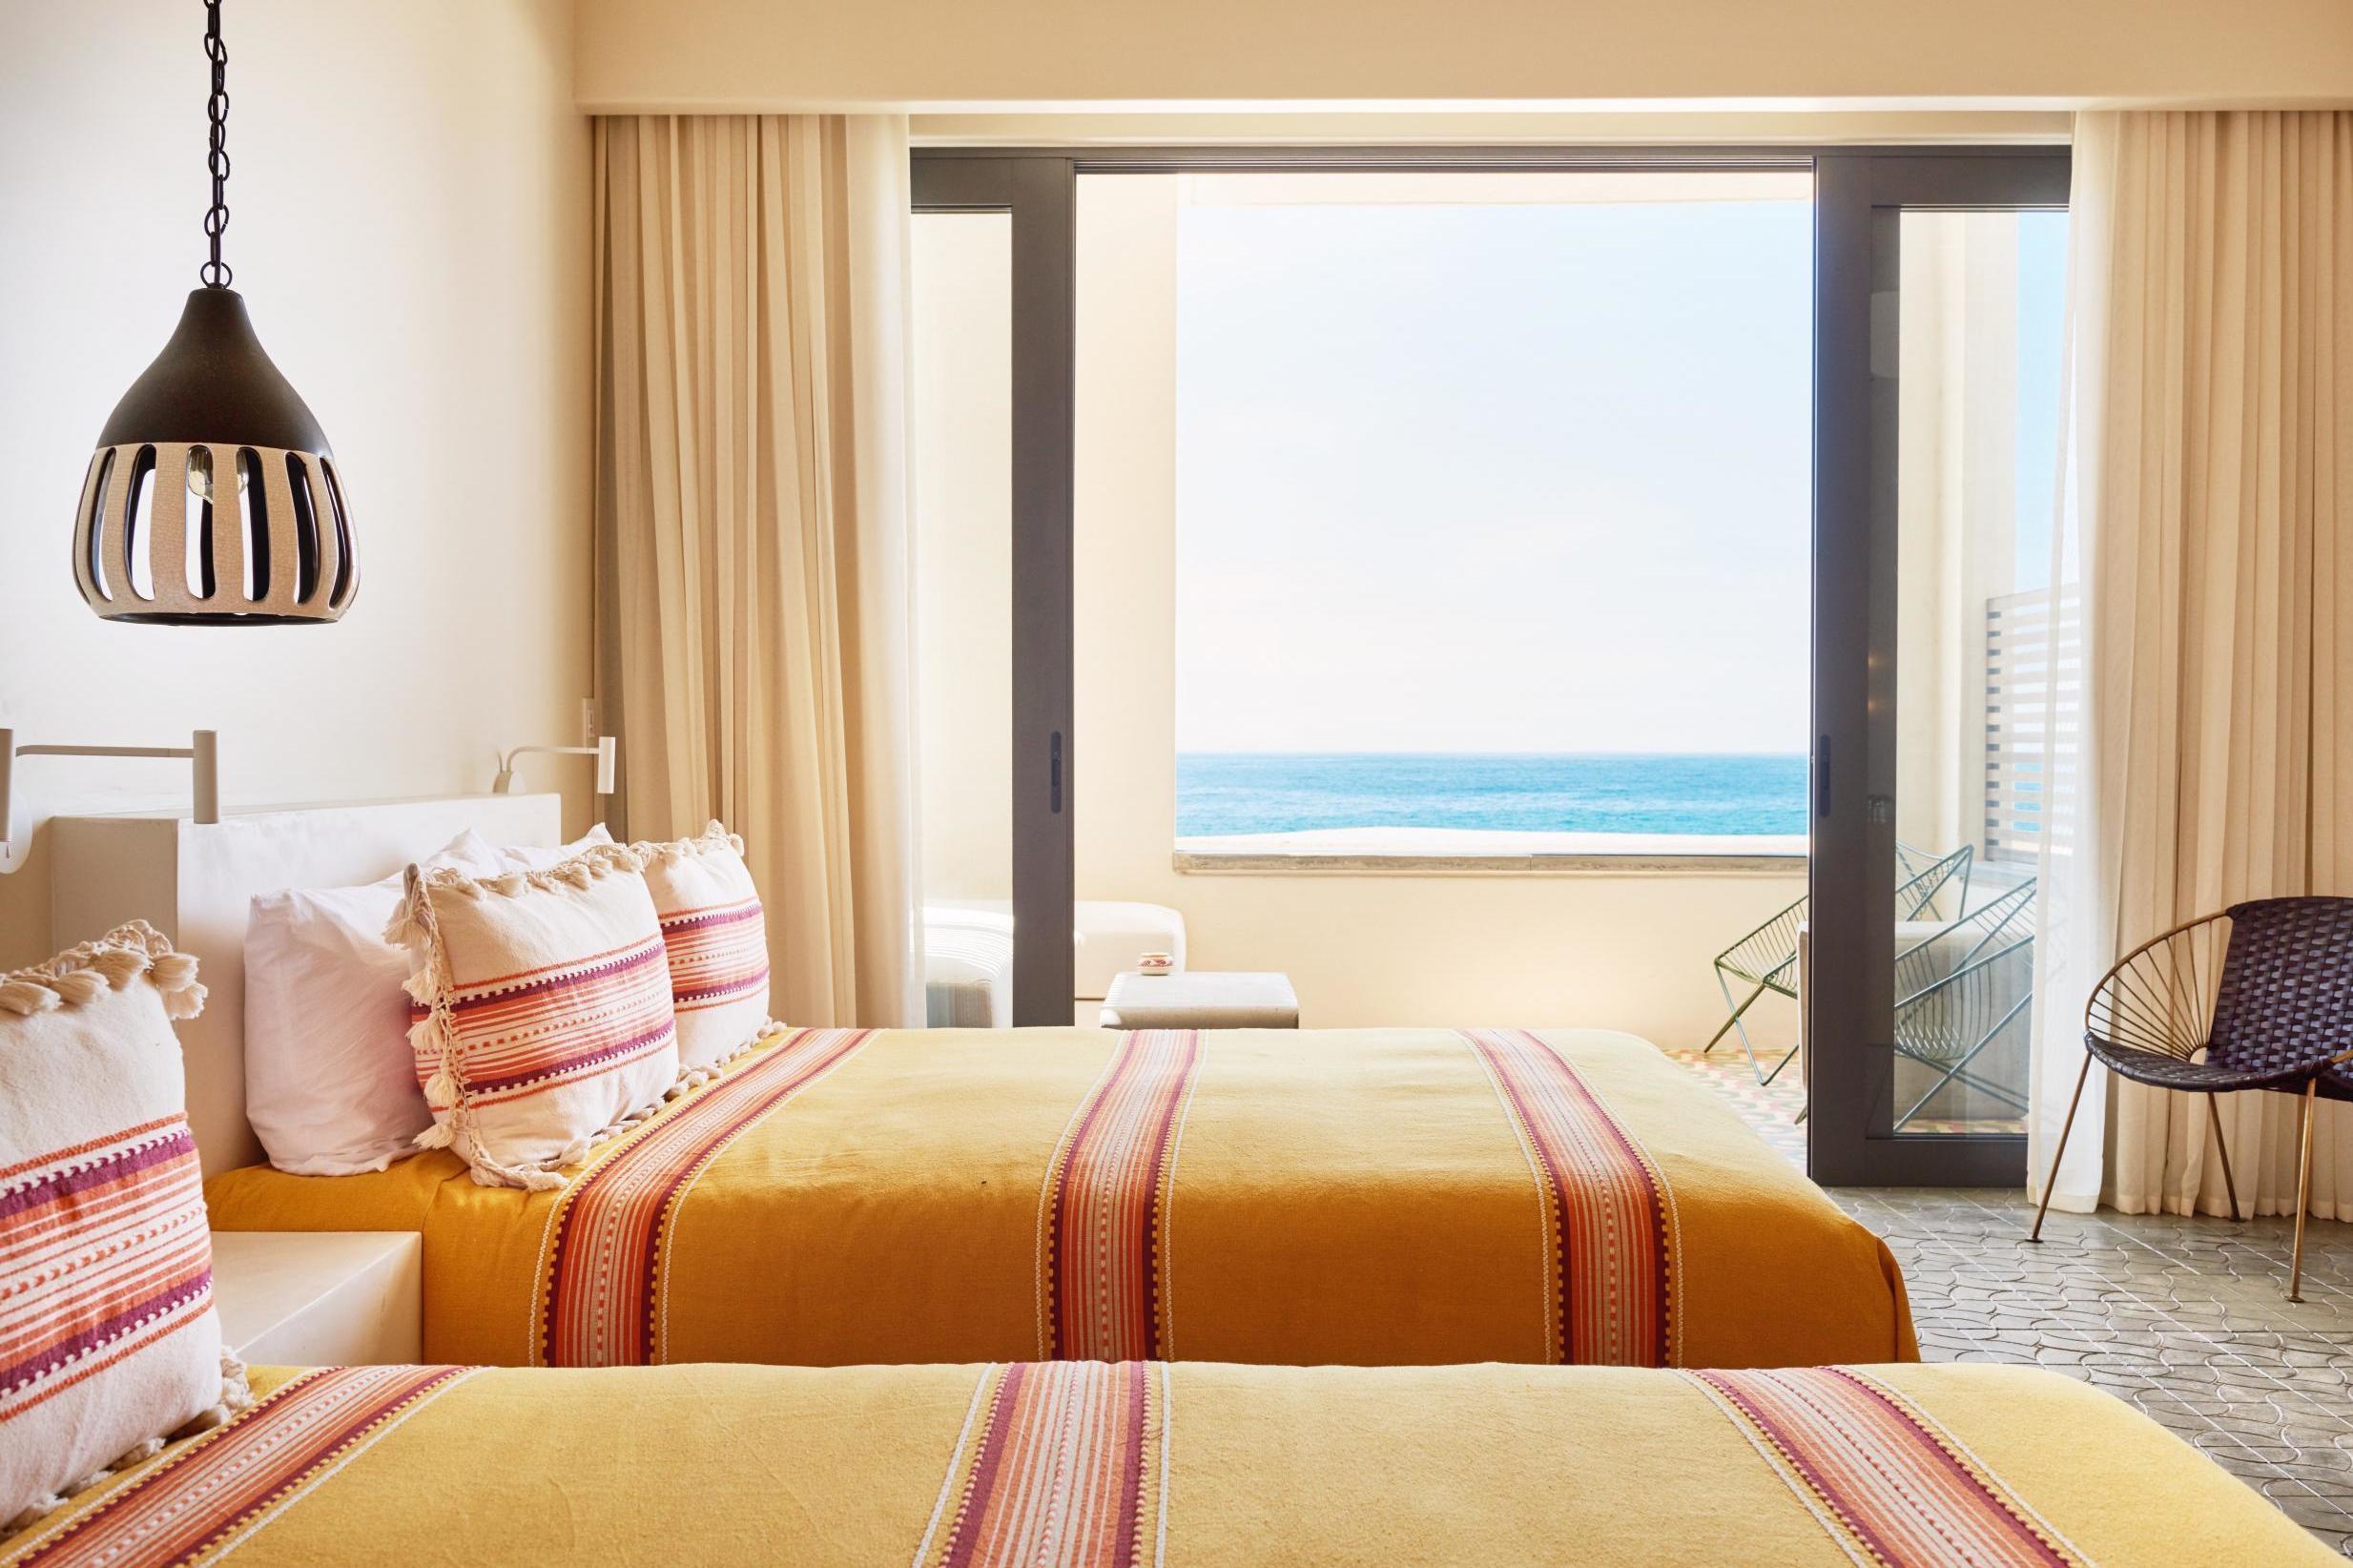 Rooms at Hotel San Cristobal Baja have 1970s-style decor and comfy beds